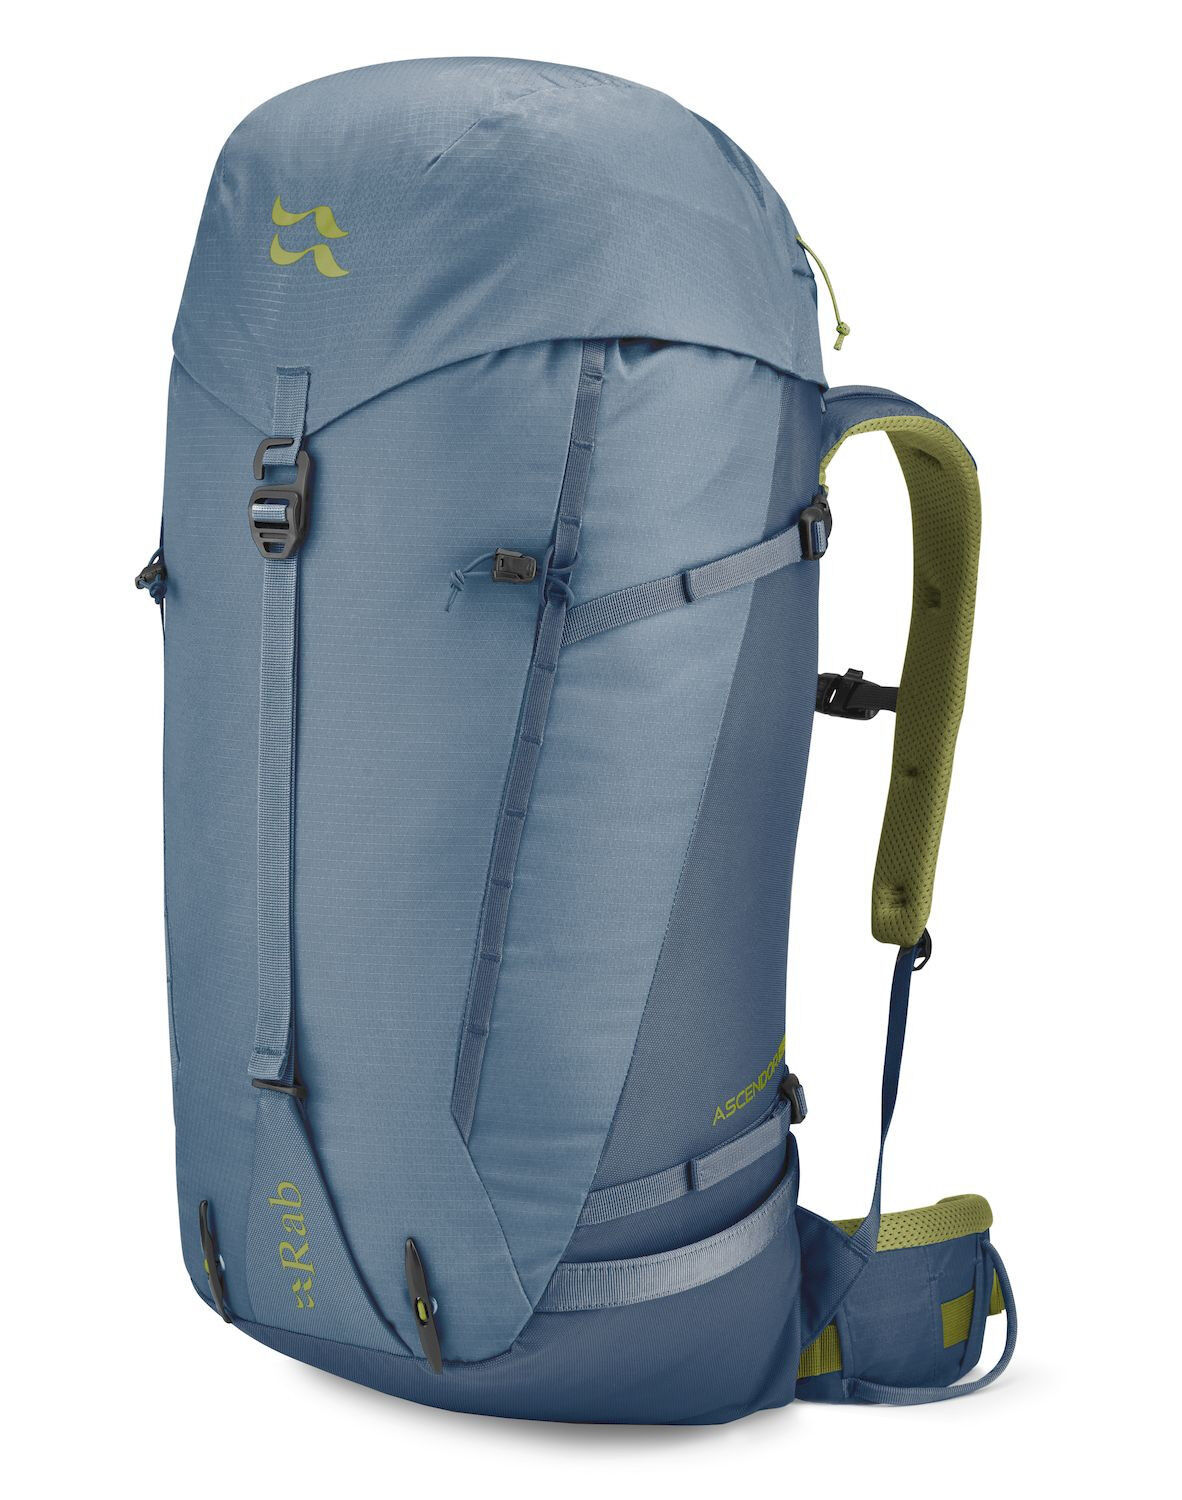 Rab Ascendor 45:50 - Mountaineering backpack